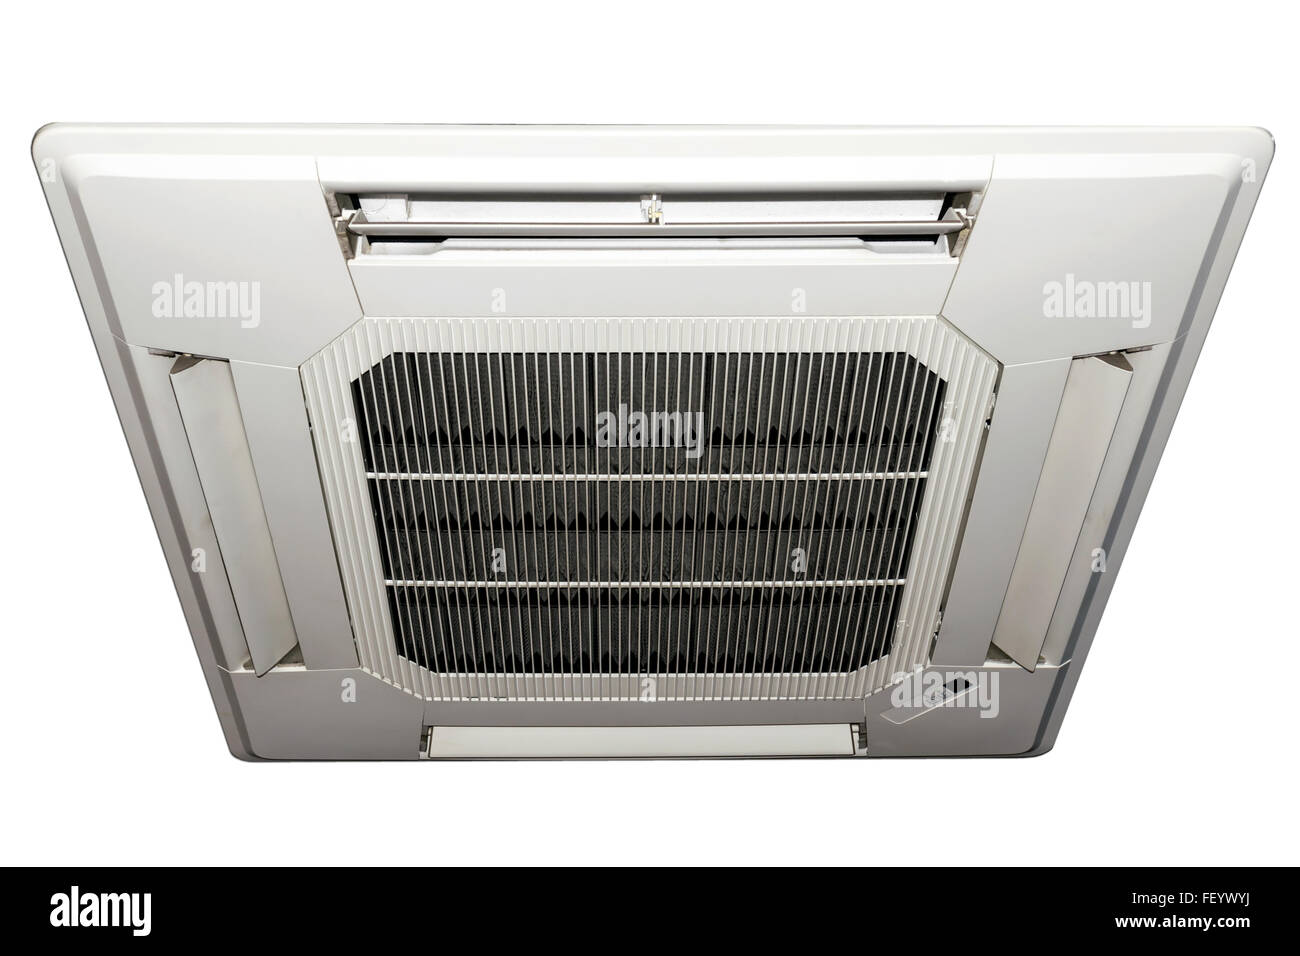 Air conditioner for home and office. Stock Photo